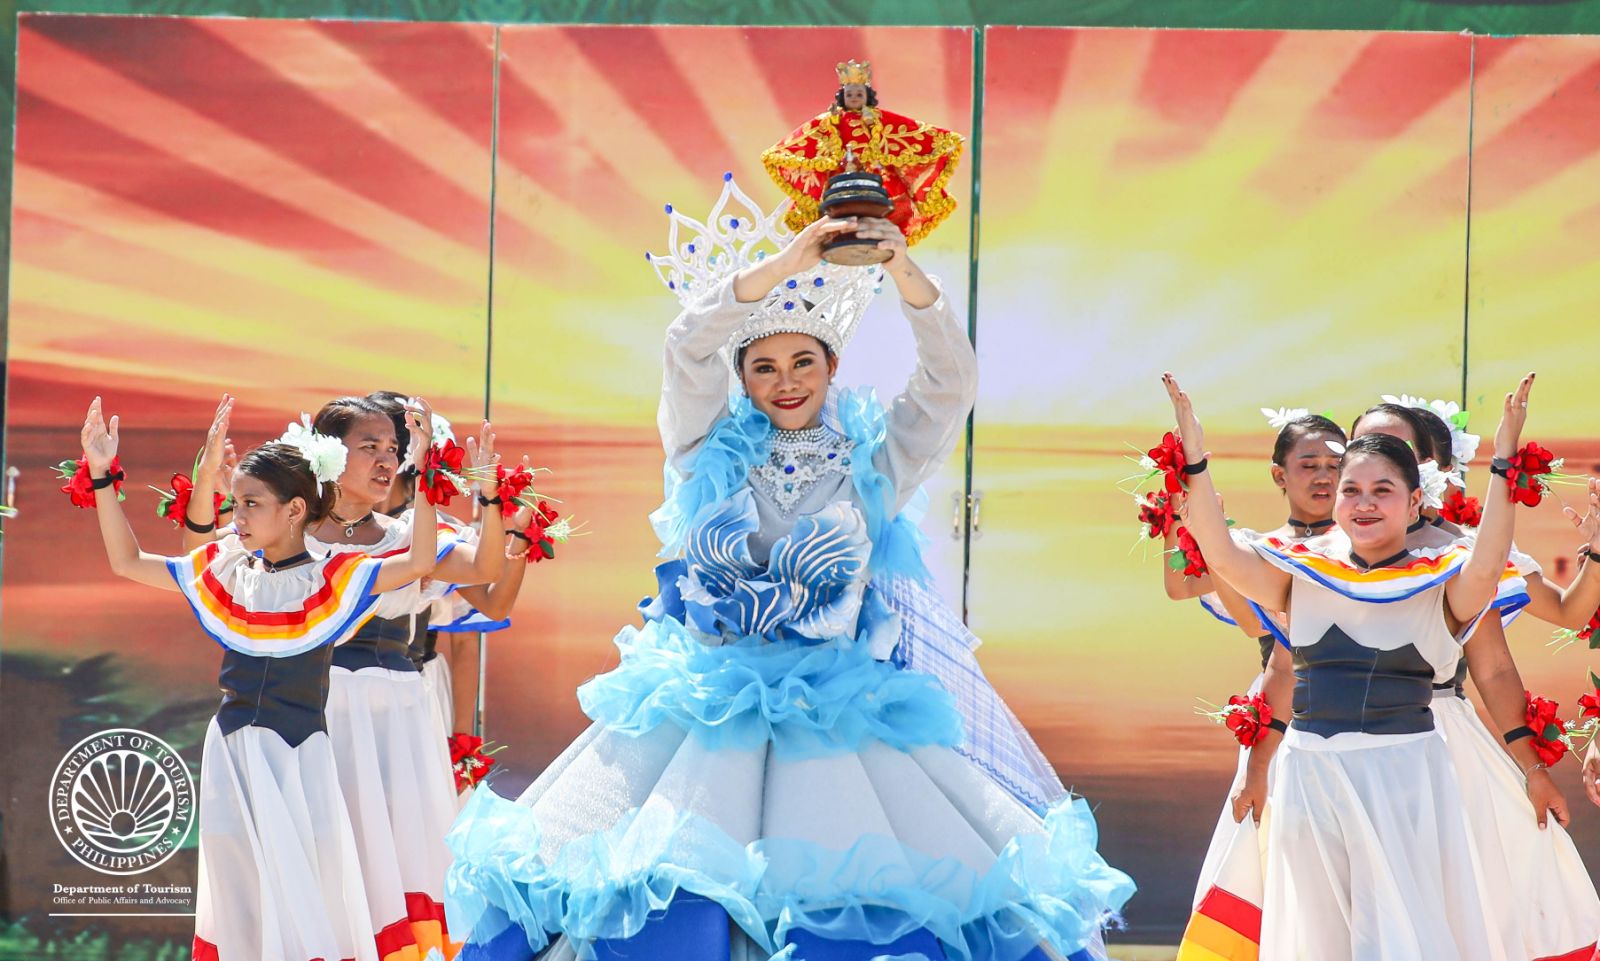 DOT Chief: Sinulog allows tourists to immerse “in an experience that transcends the ordinary